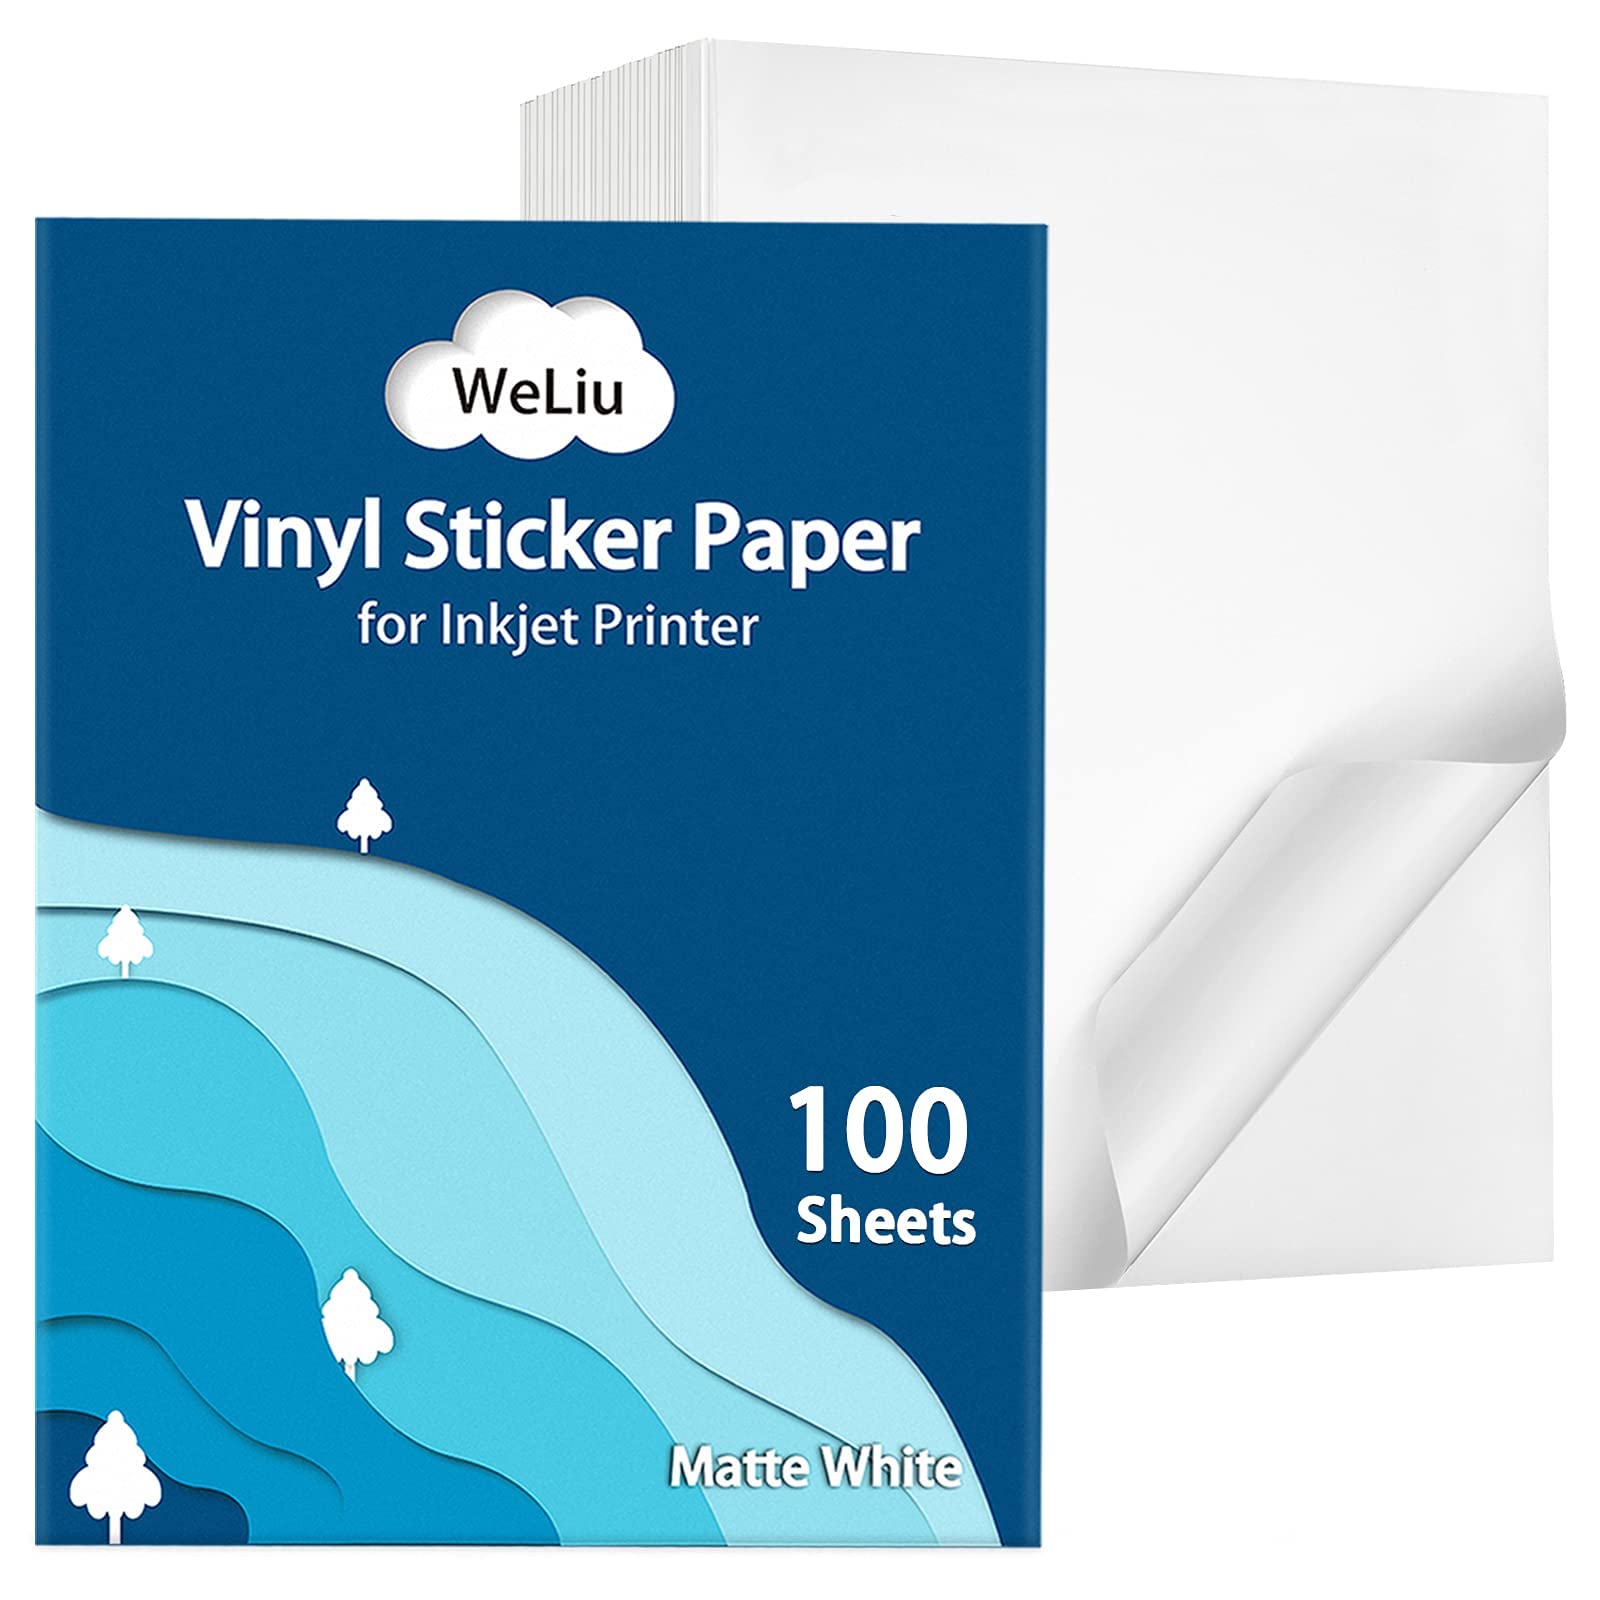 WeLiu Premium Printable Vinyl Sticker Paper for Inkjet Printer,100 Sheets Matte White Waterproof Decal Paper, Dries Quickly and 